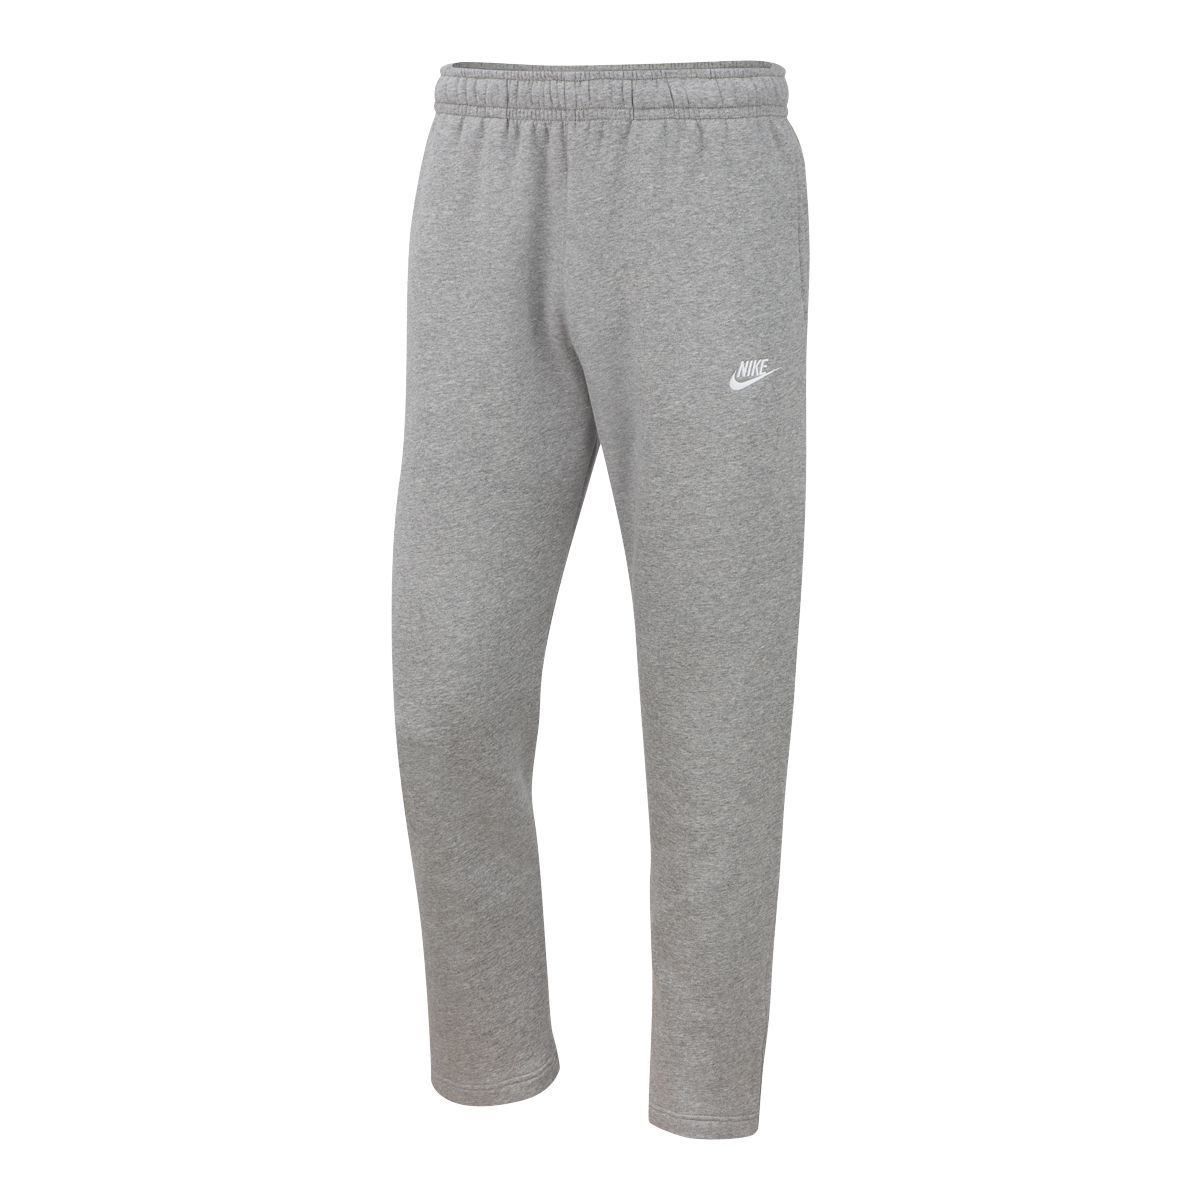 Nike Men's Club BB Sweatpants  Fleece Workout Gym Athletic Tapered